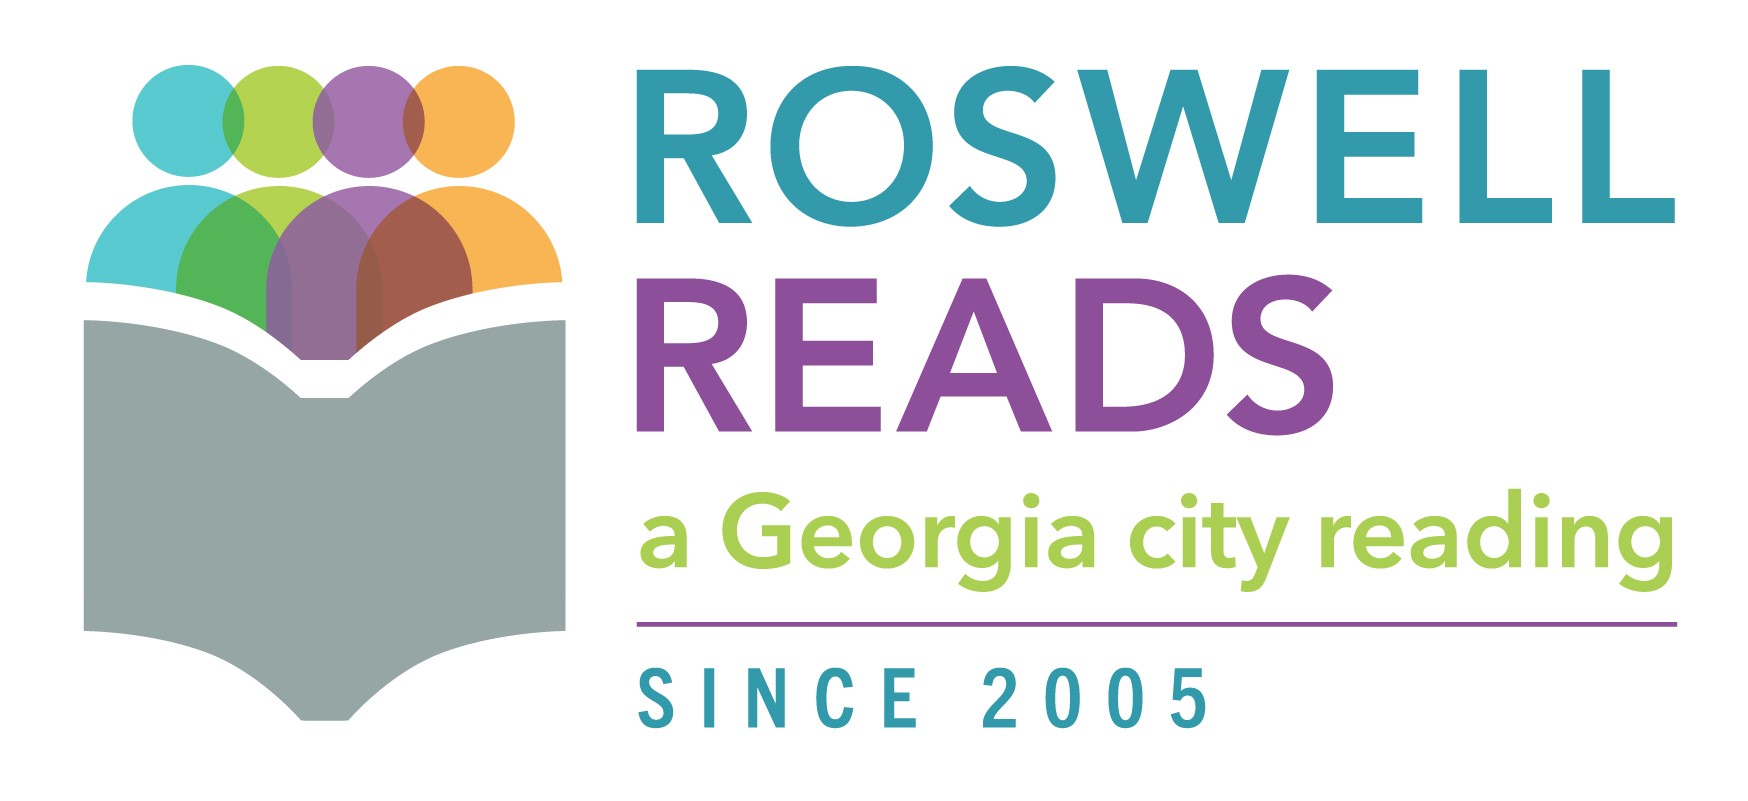 Roswell Reads